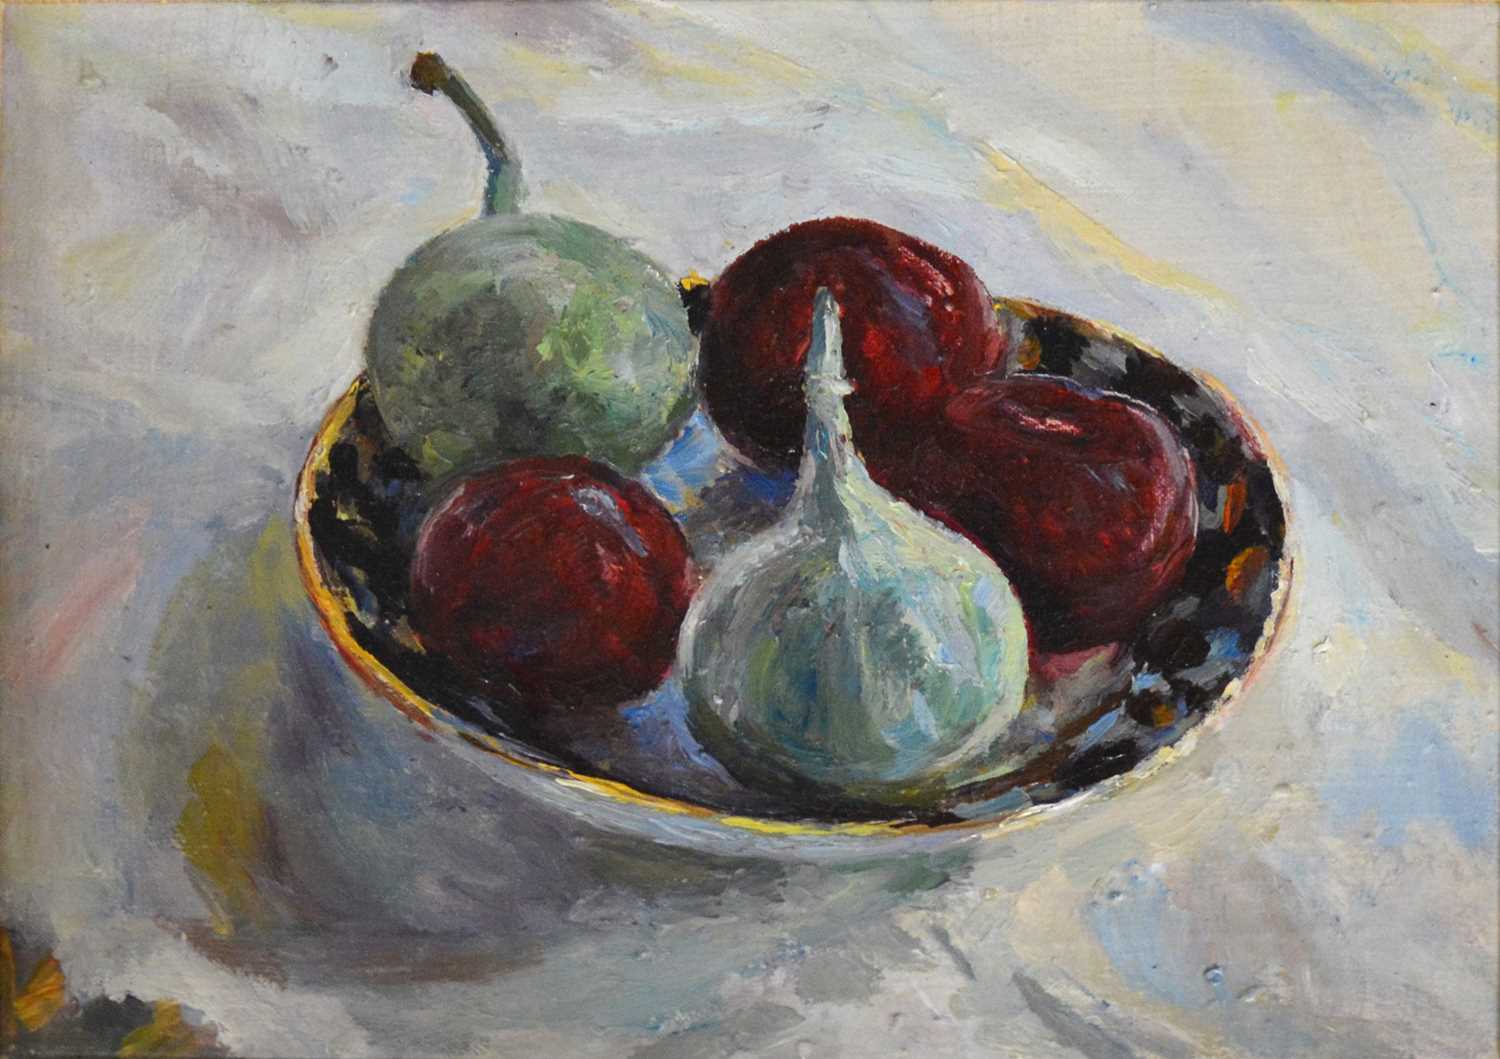 Pat Porter, Figs and Plums II, and Three Fresh Eggs. - Image 3 of 3